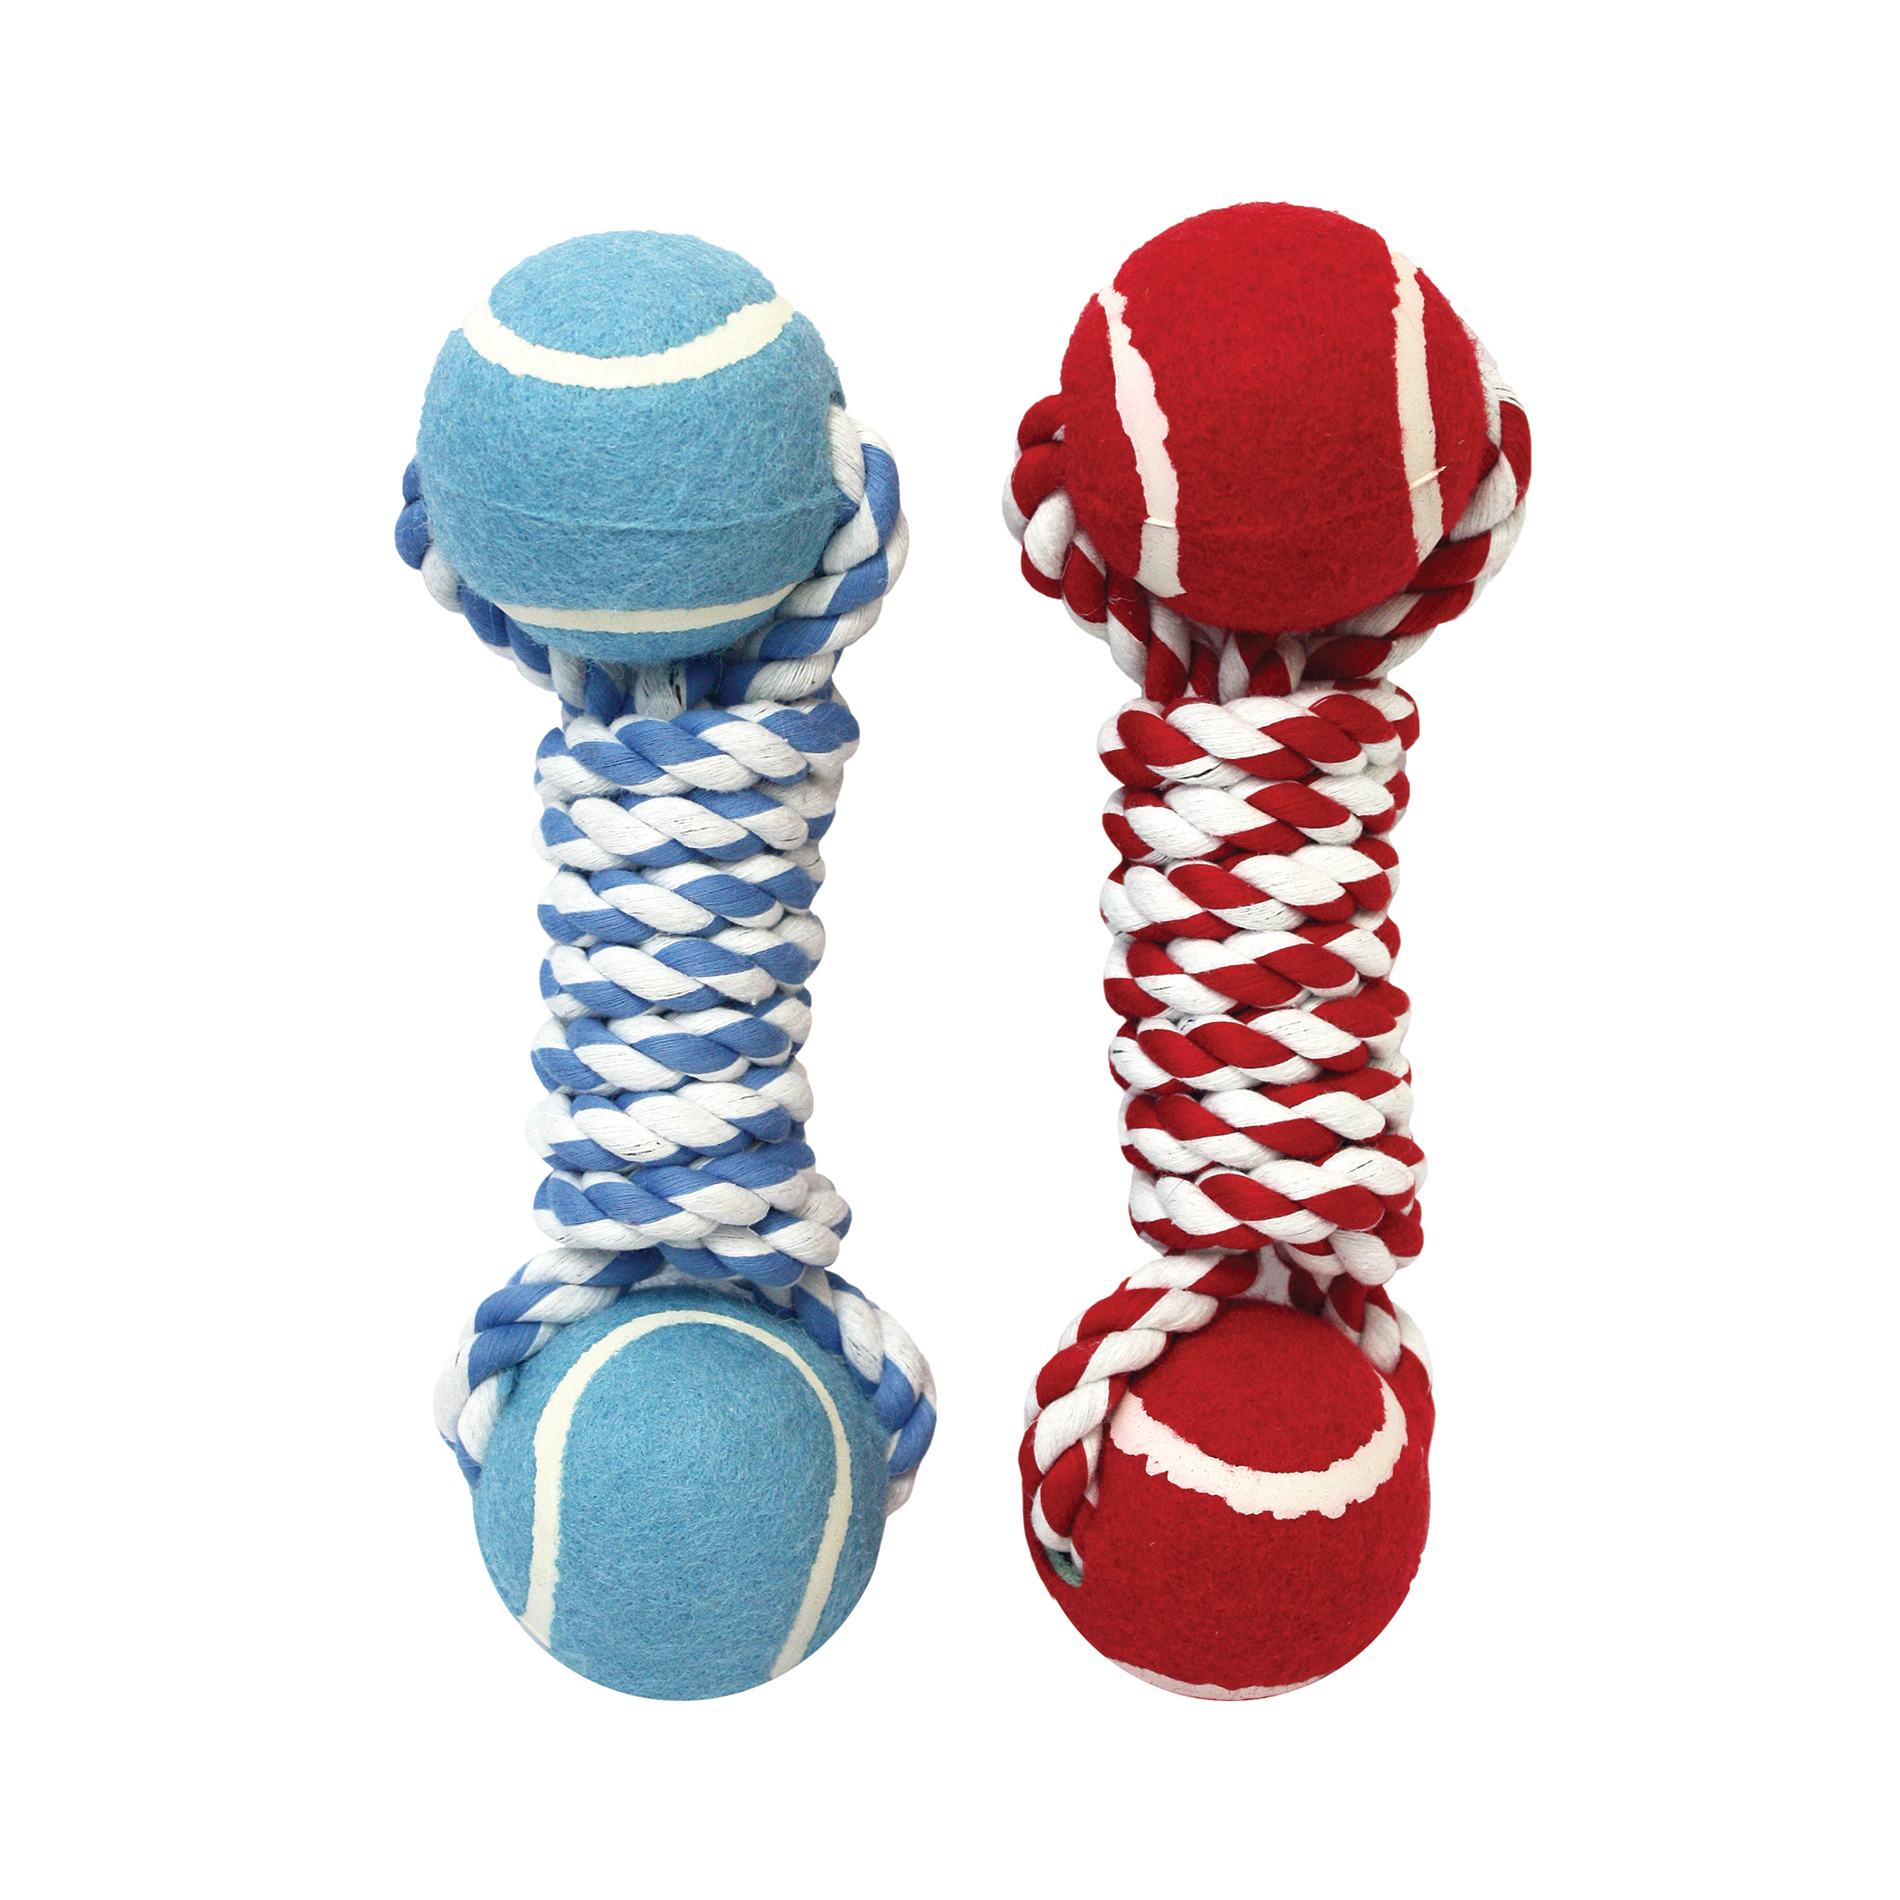 Champion Breed Holiday Rope Tug With Tennis Balls Set - 2 Count